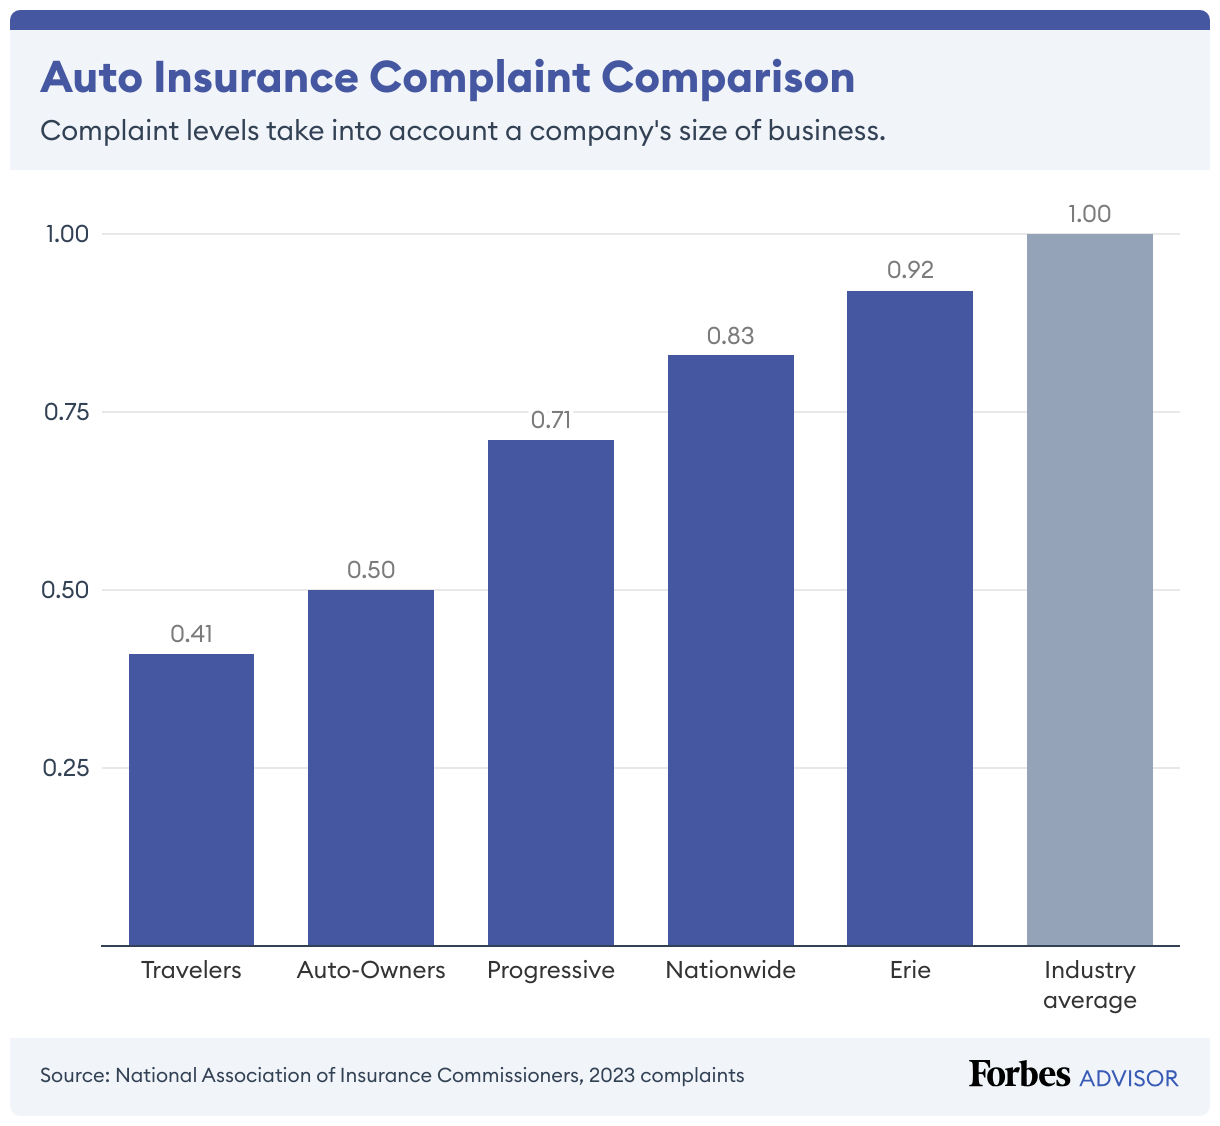 Travelers and Auto Owners have very low levels of complaints, while Erie is just below the industry average.